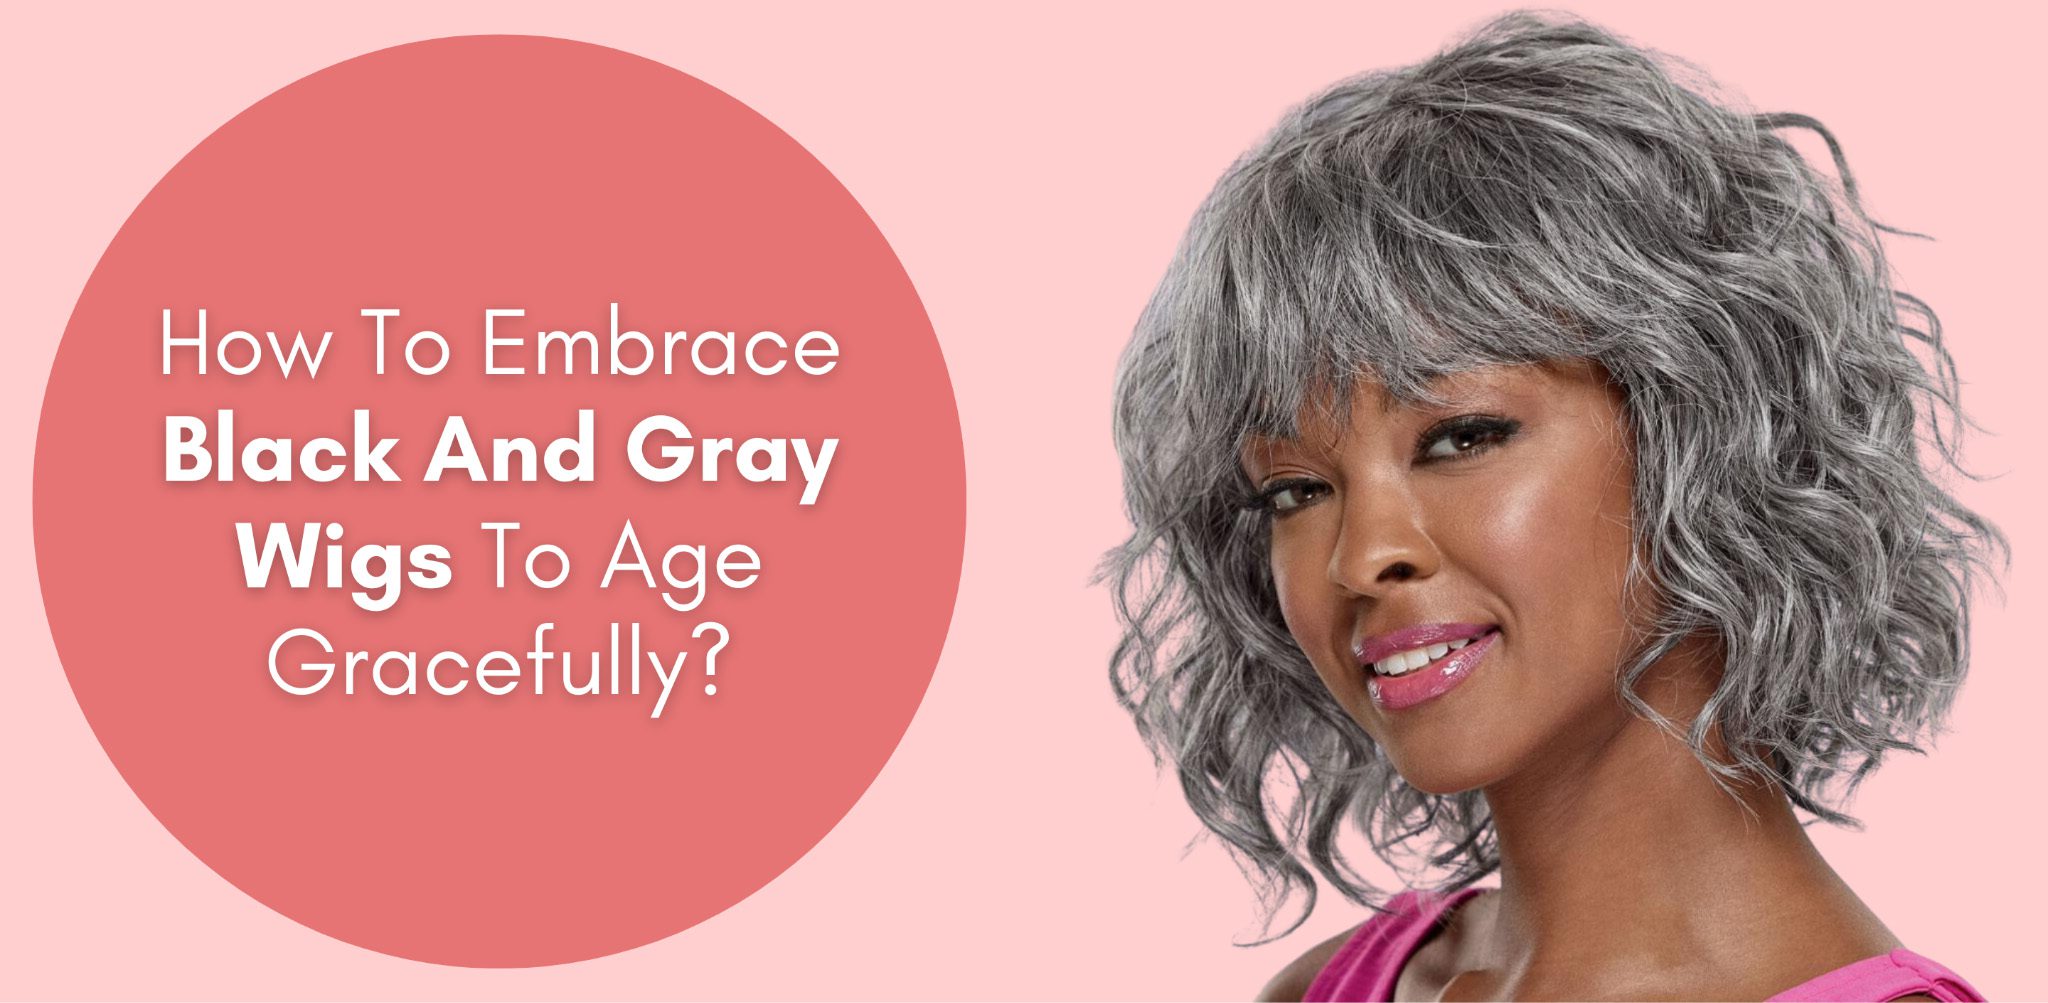 How To Embrace Black And Gray Wigs To Age Gracefully?